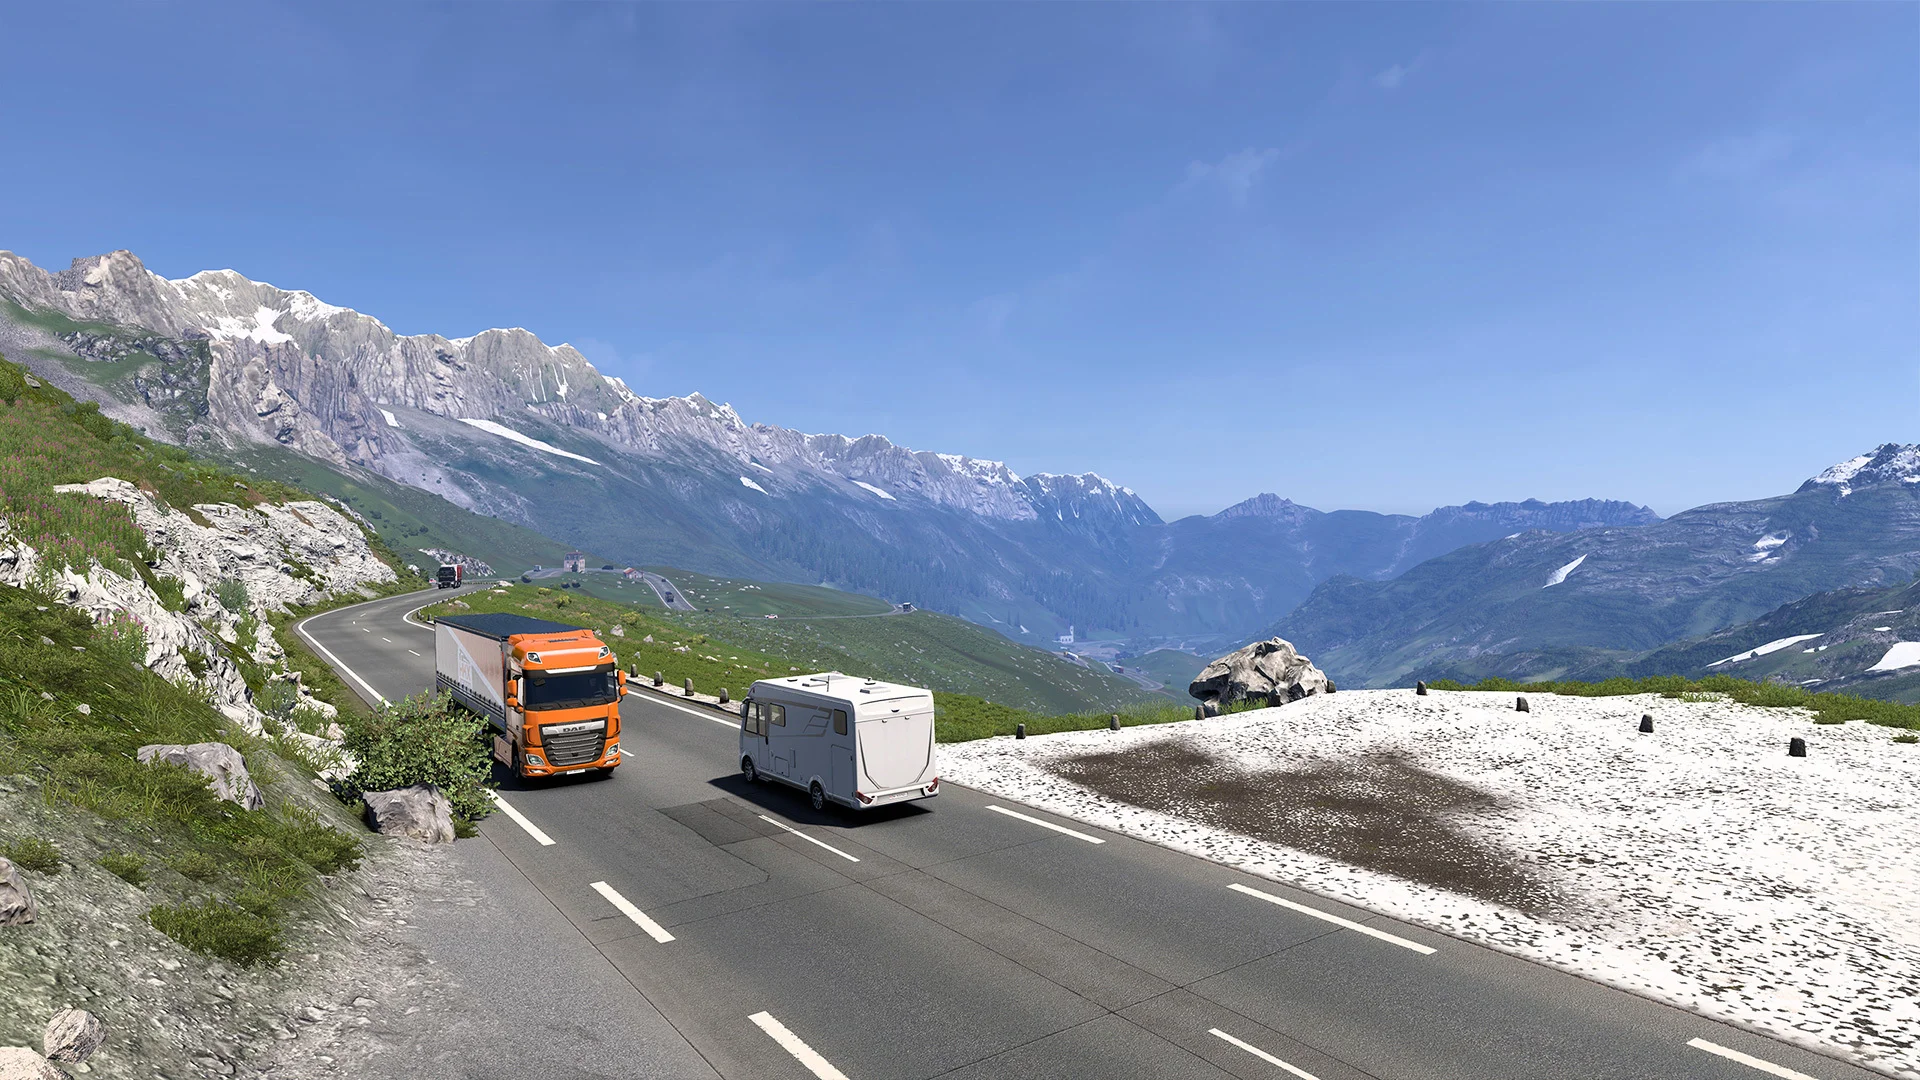 Euro Truck Simulator 2 features a redesigned Switzerland and the return of a global event that was held 6 years ago